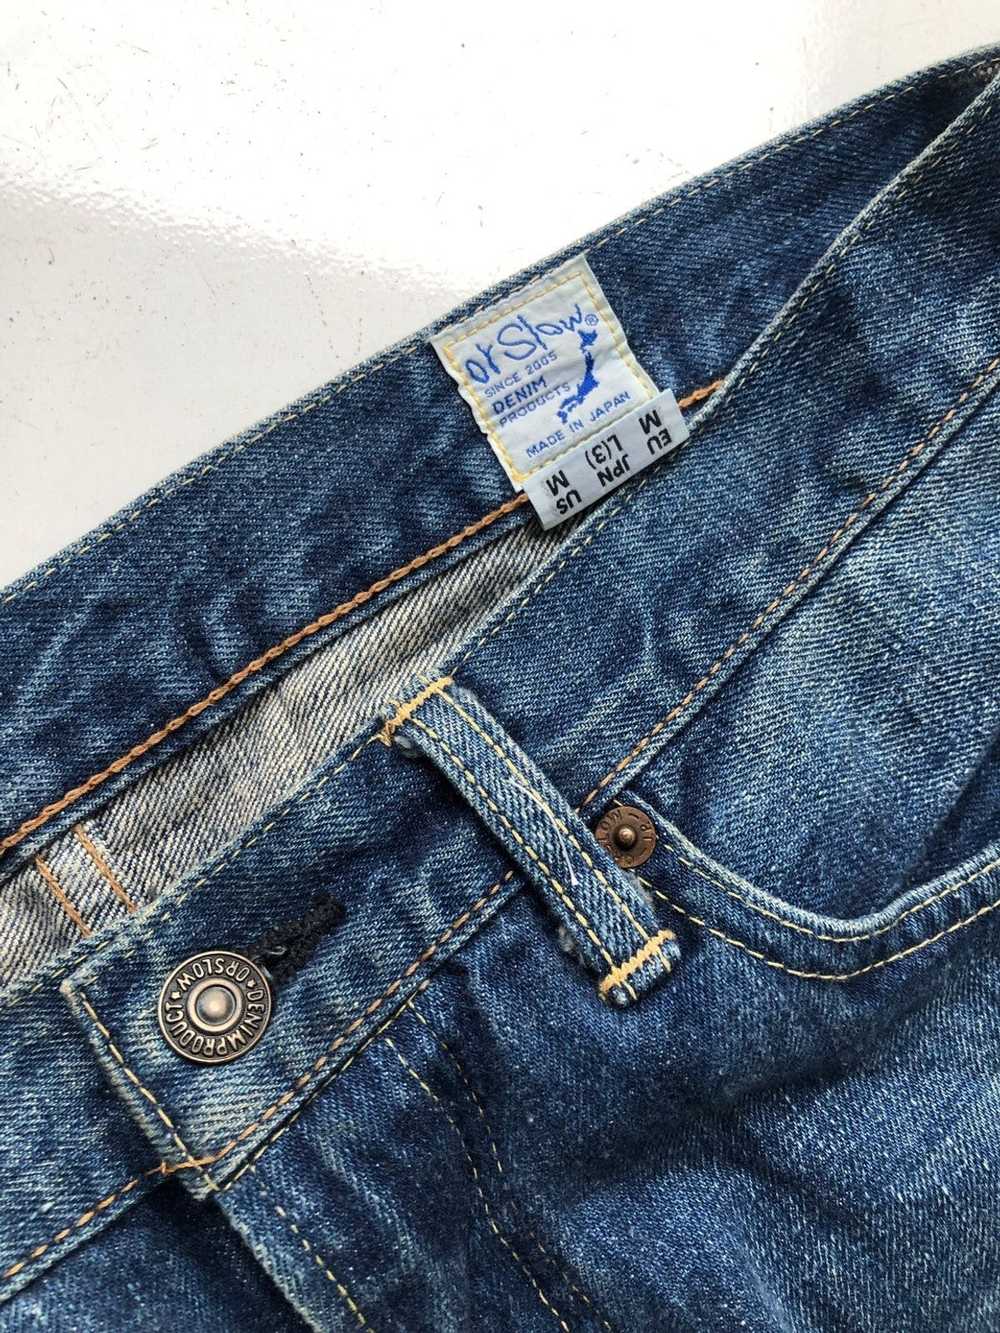 Japanese Brand × Orslow Orslow jeans selvedge - image 7